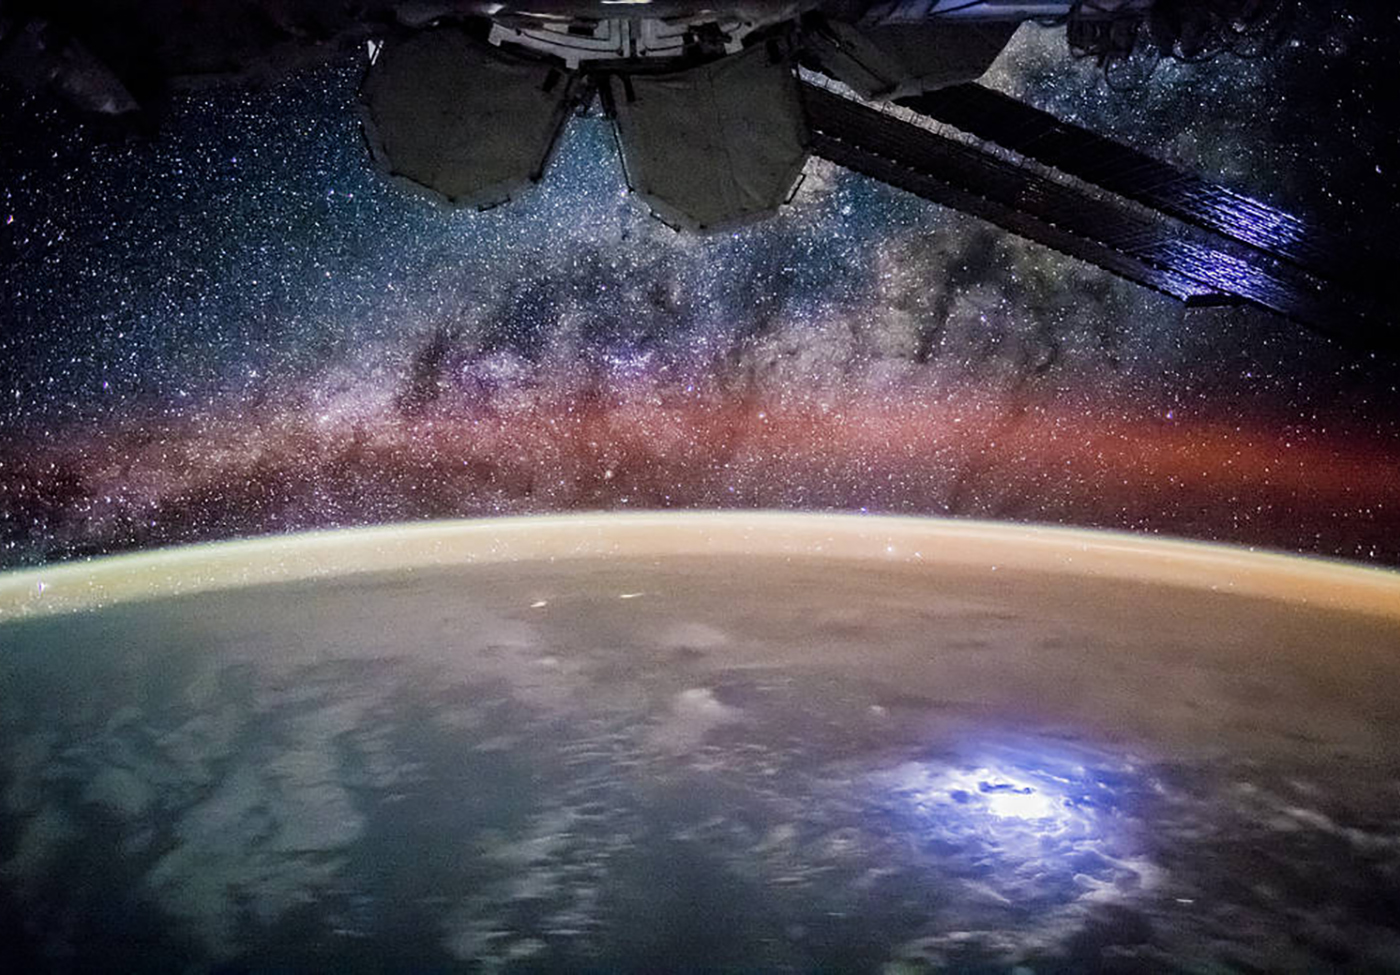 NASA’s photo from the International Space Station with a lightning storm on Earth below and the Milky Way above, taken by the Expedition 44 crew. 